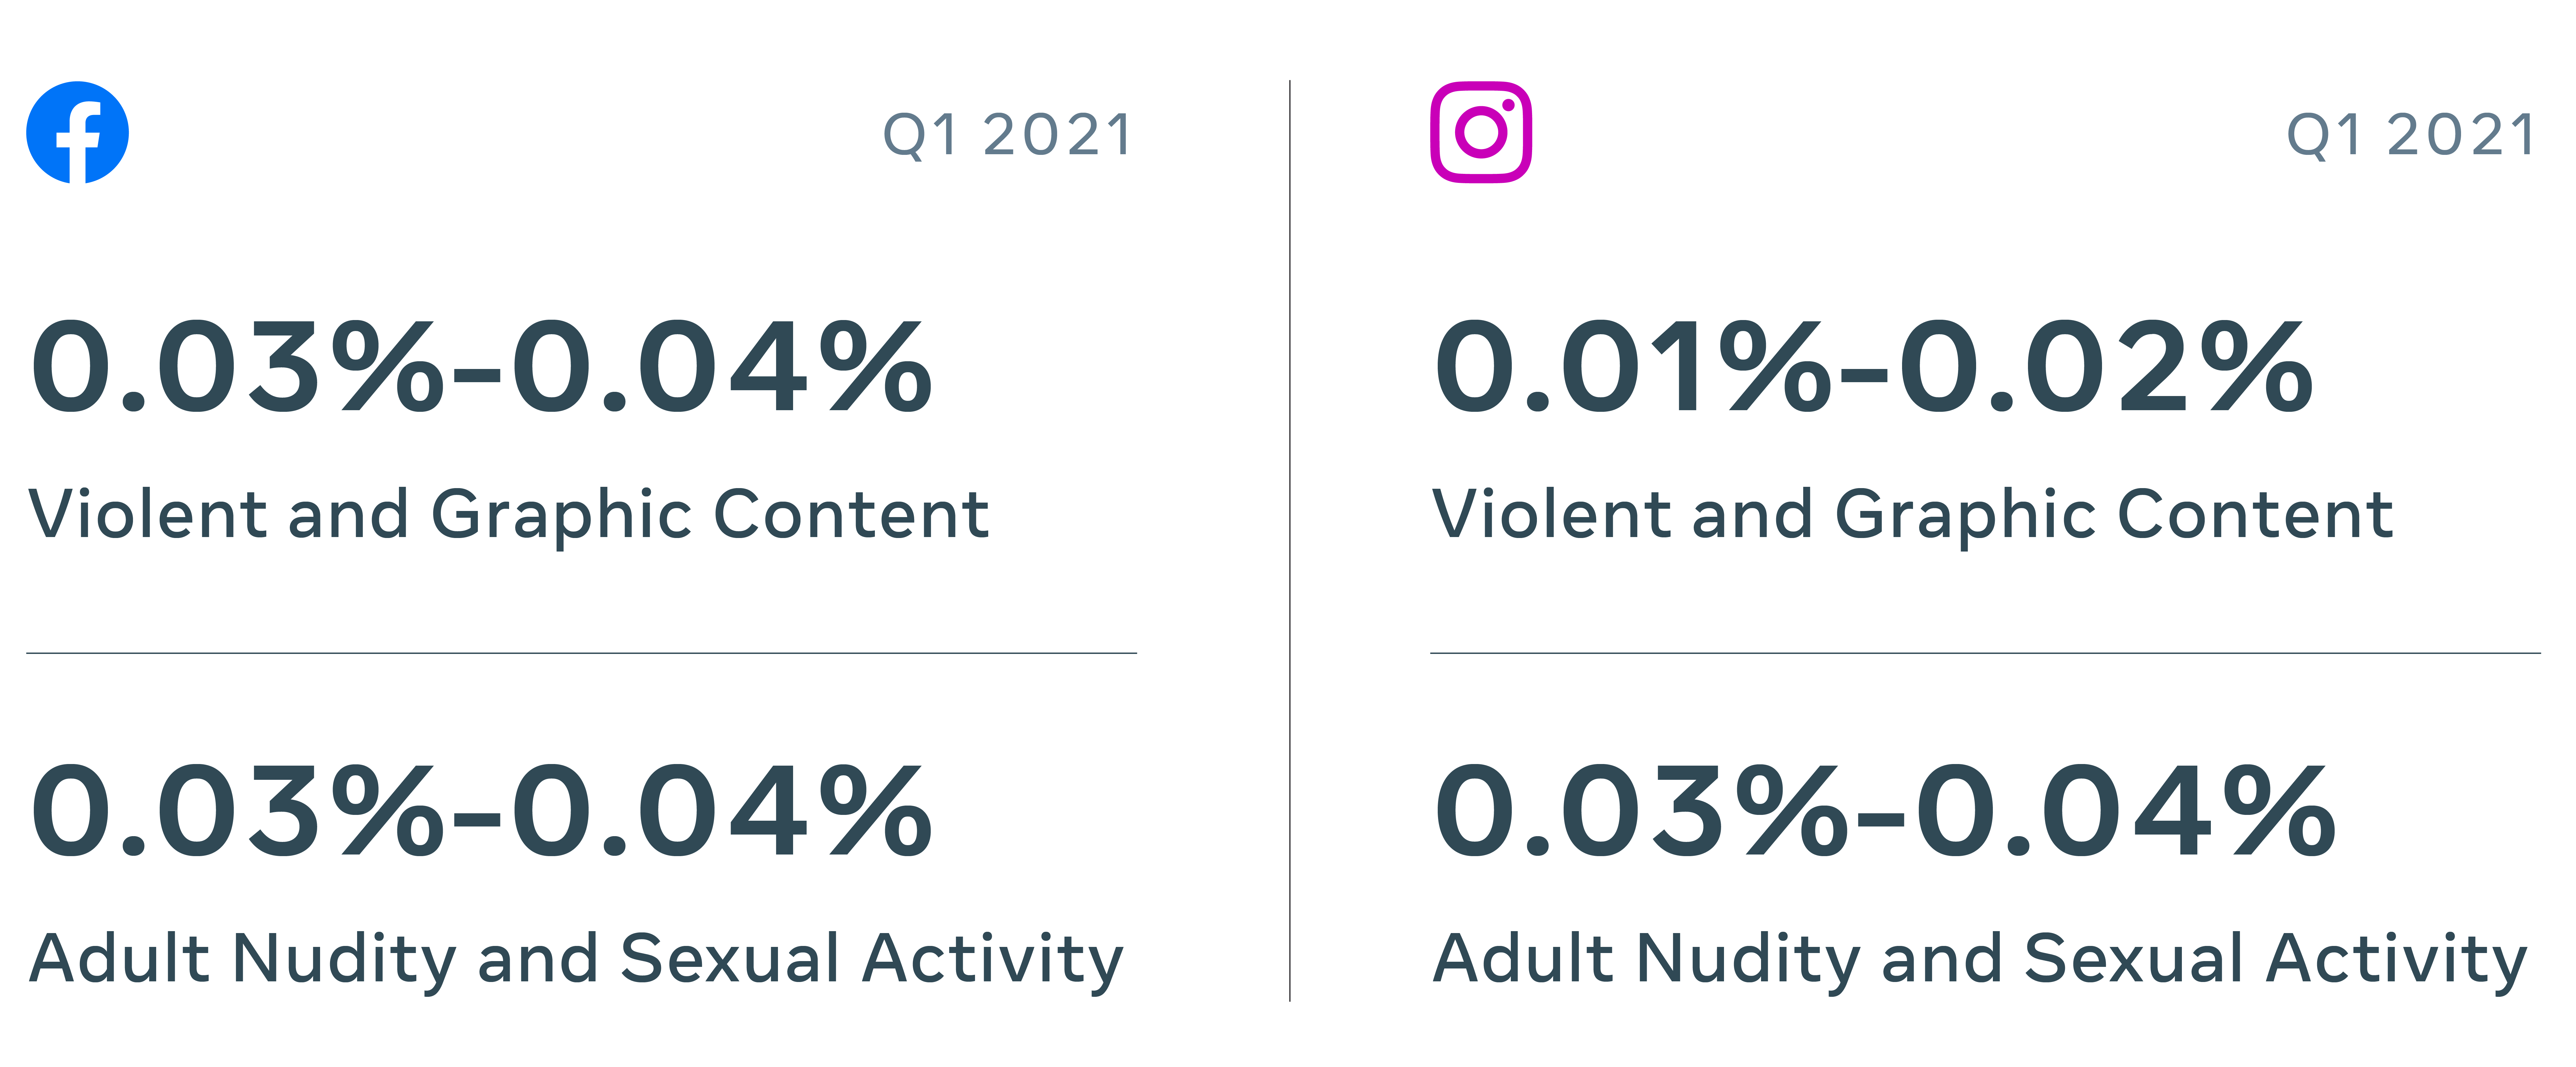 Stat graphic showing prevalence of violent and graphic content and adult nudity and sexual activity